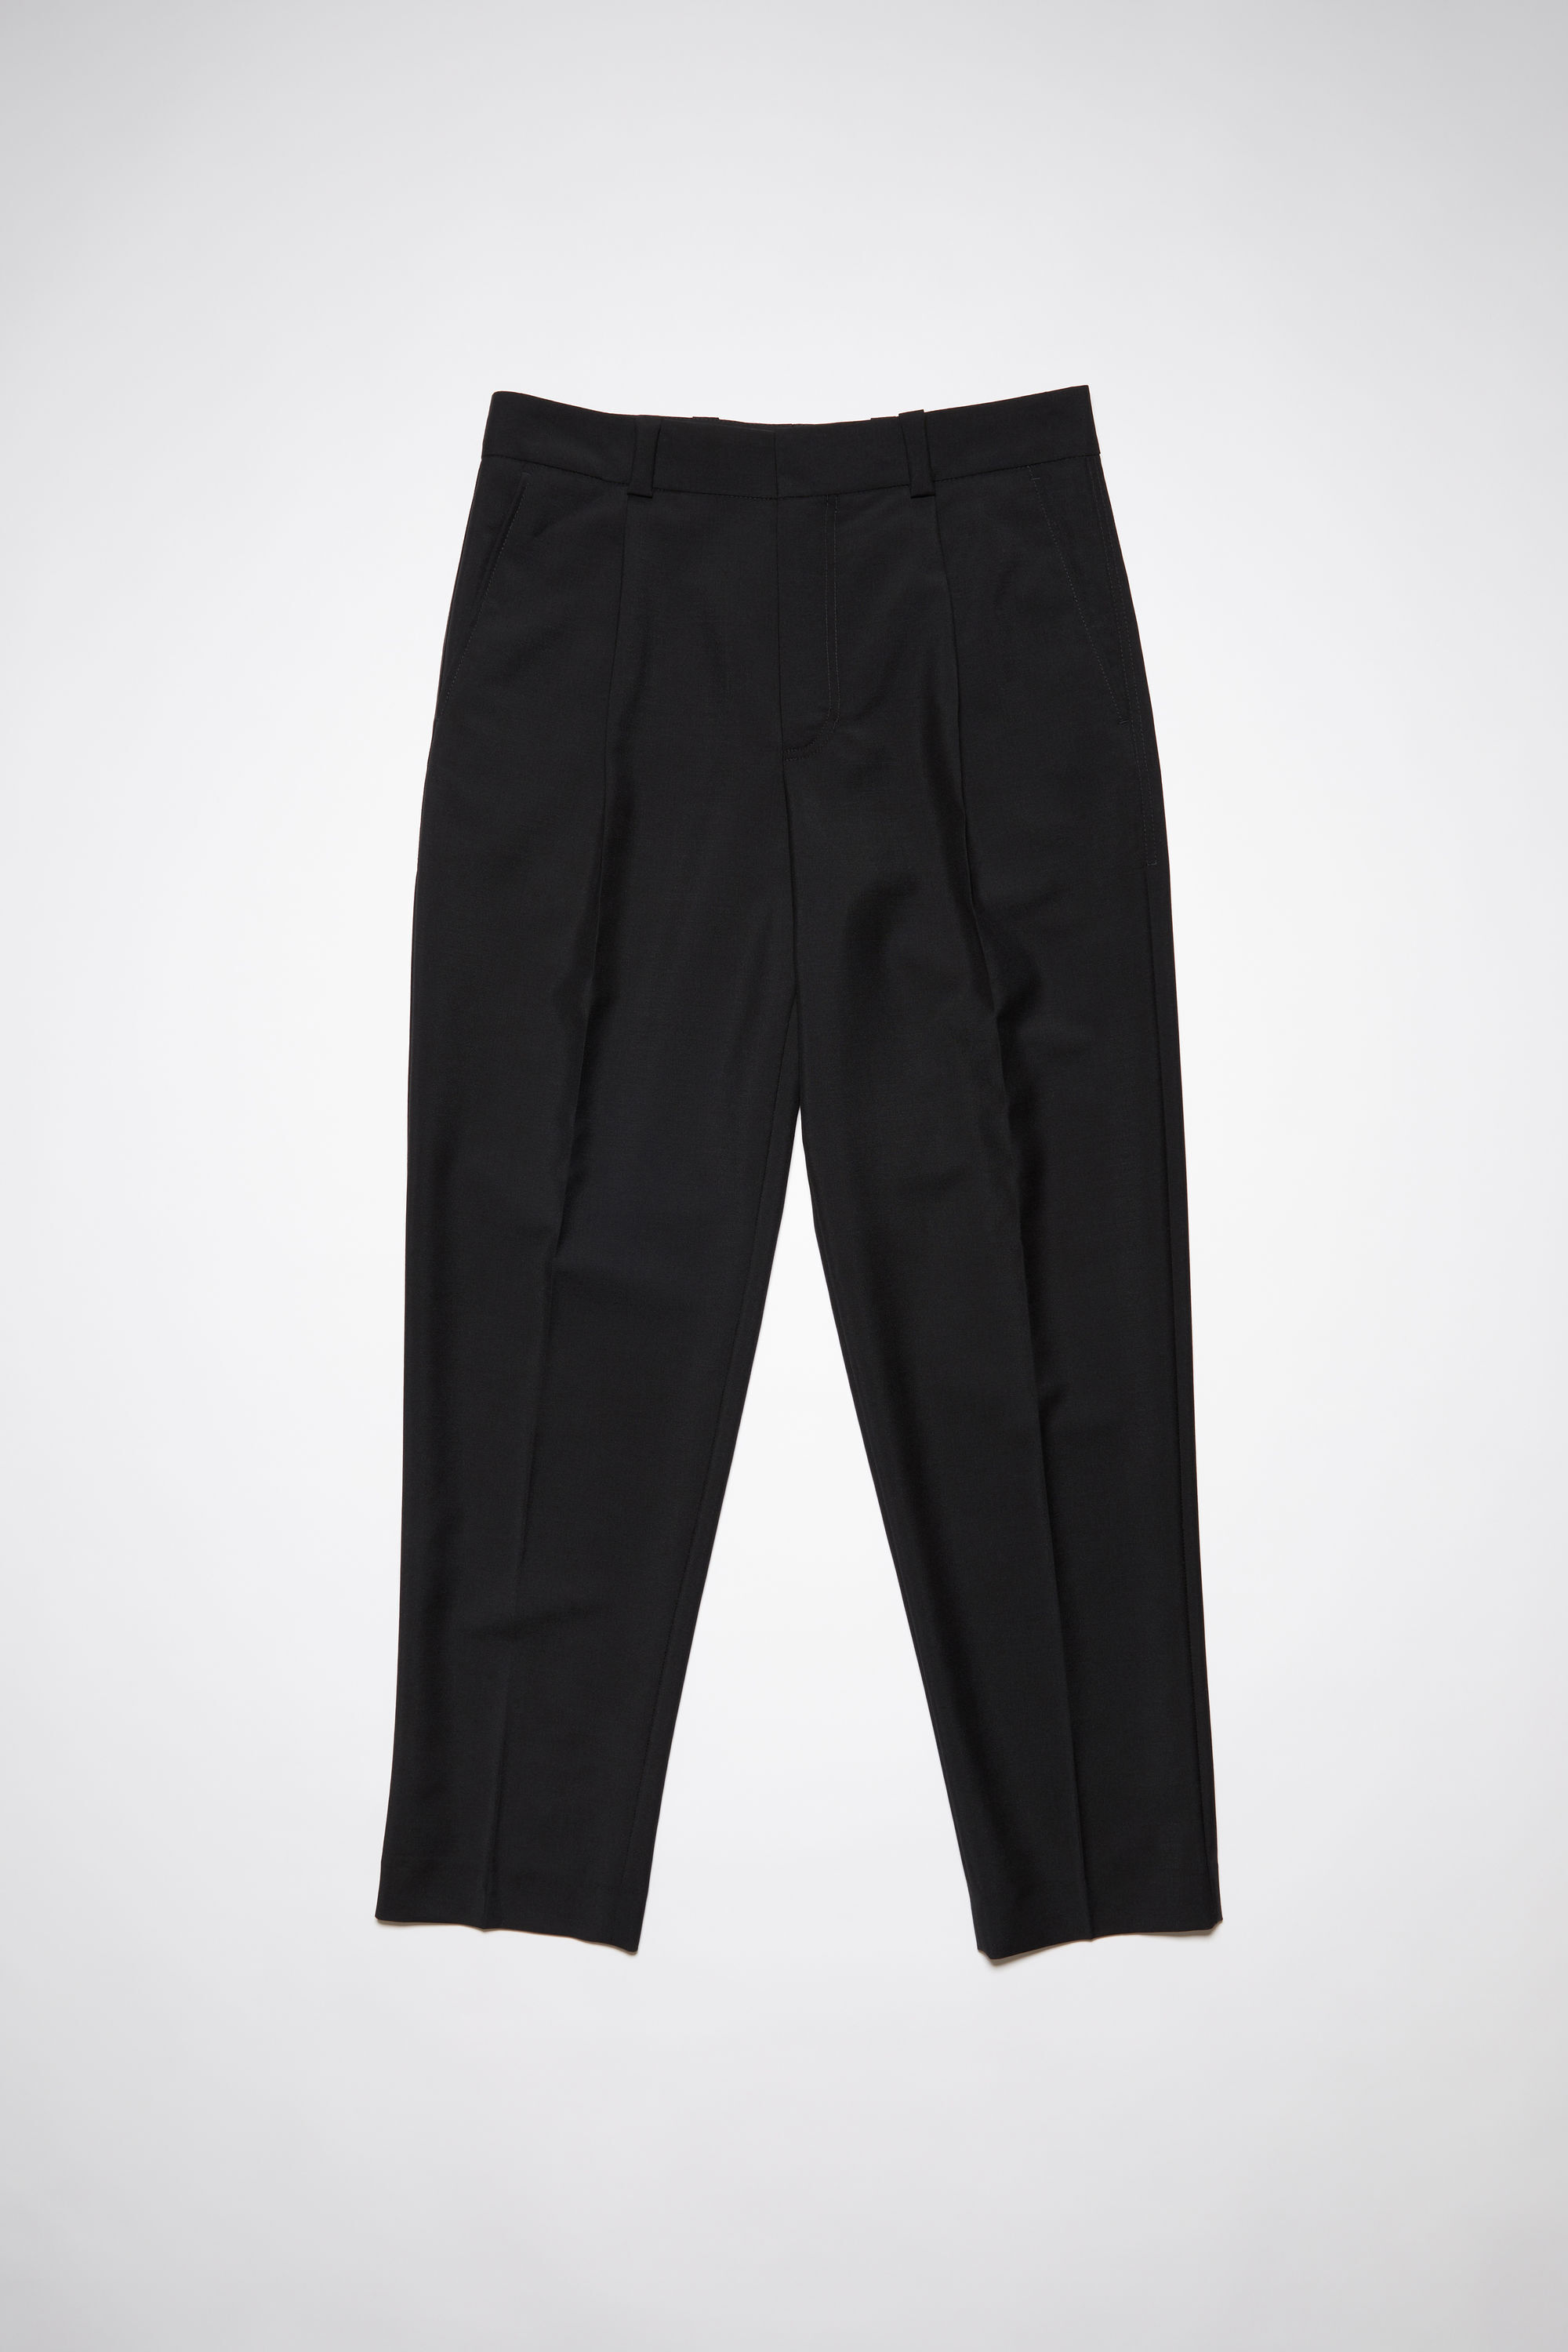 acne studios 2016aw wool trousers